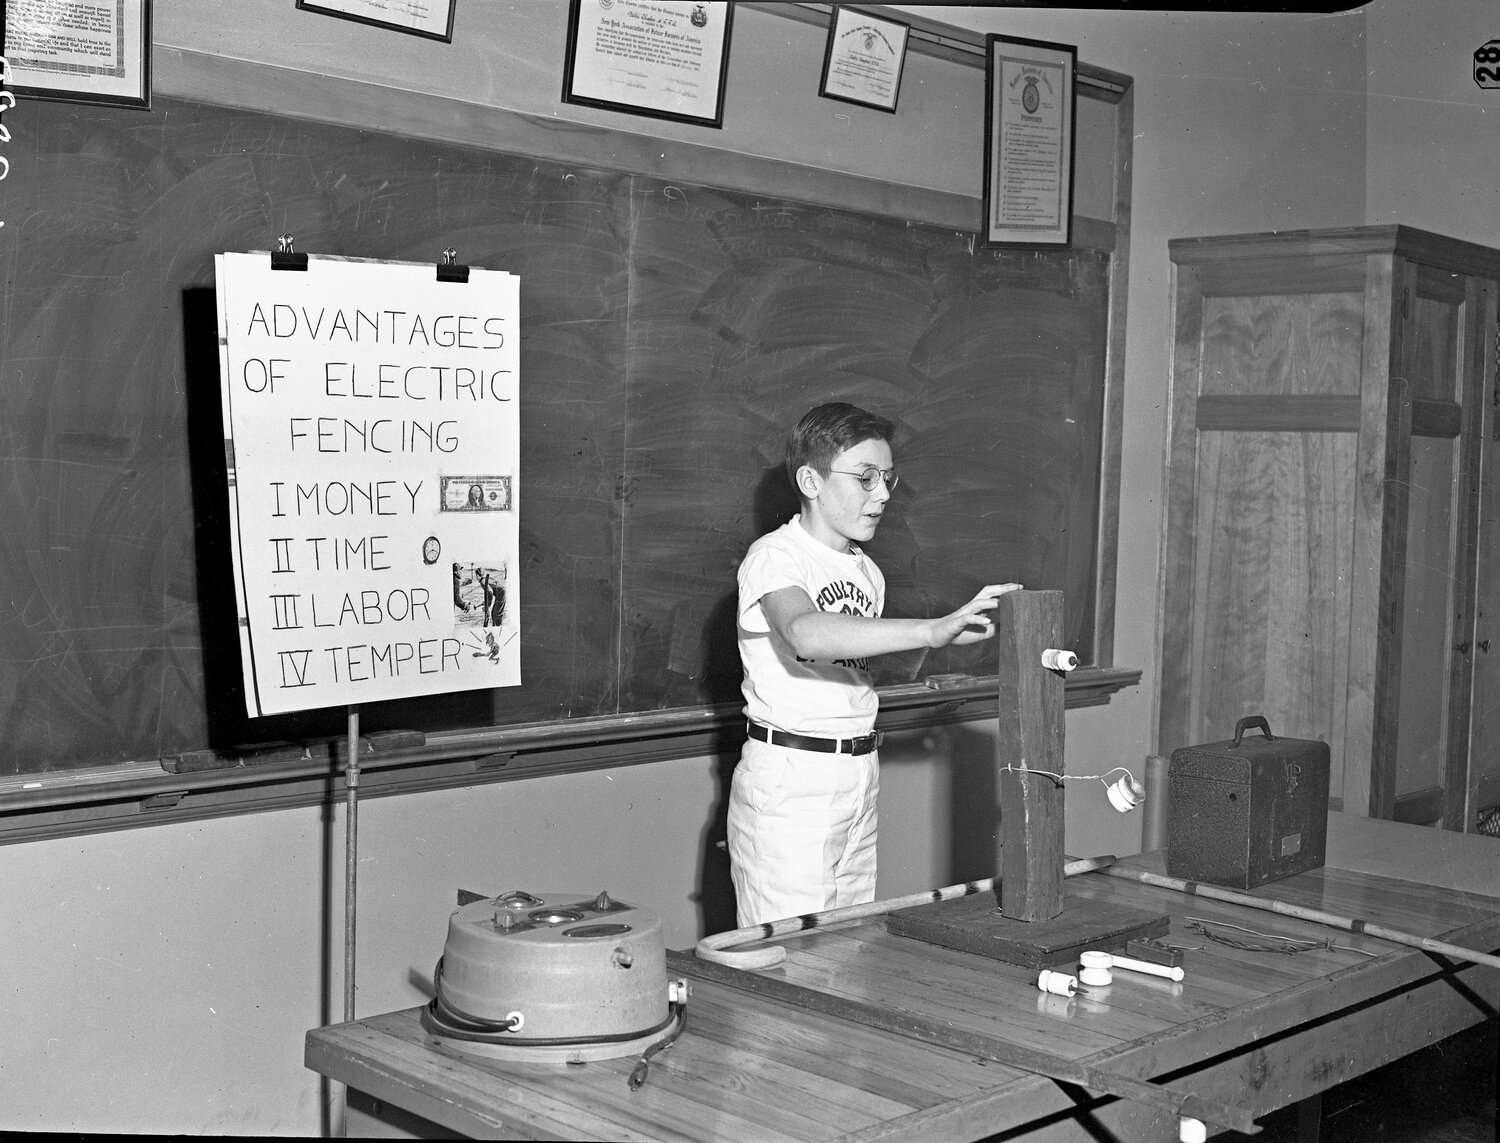 4-H Club presentation on the advantages of electric fencing, 1951.